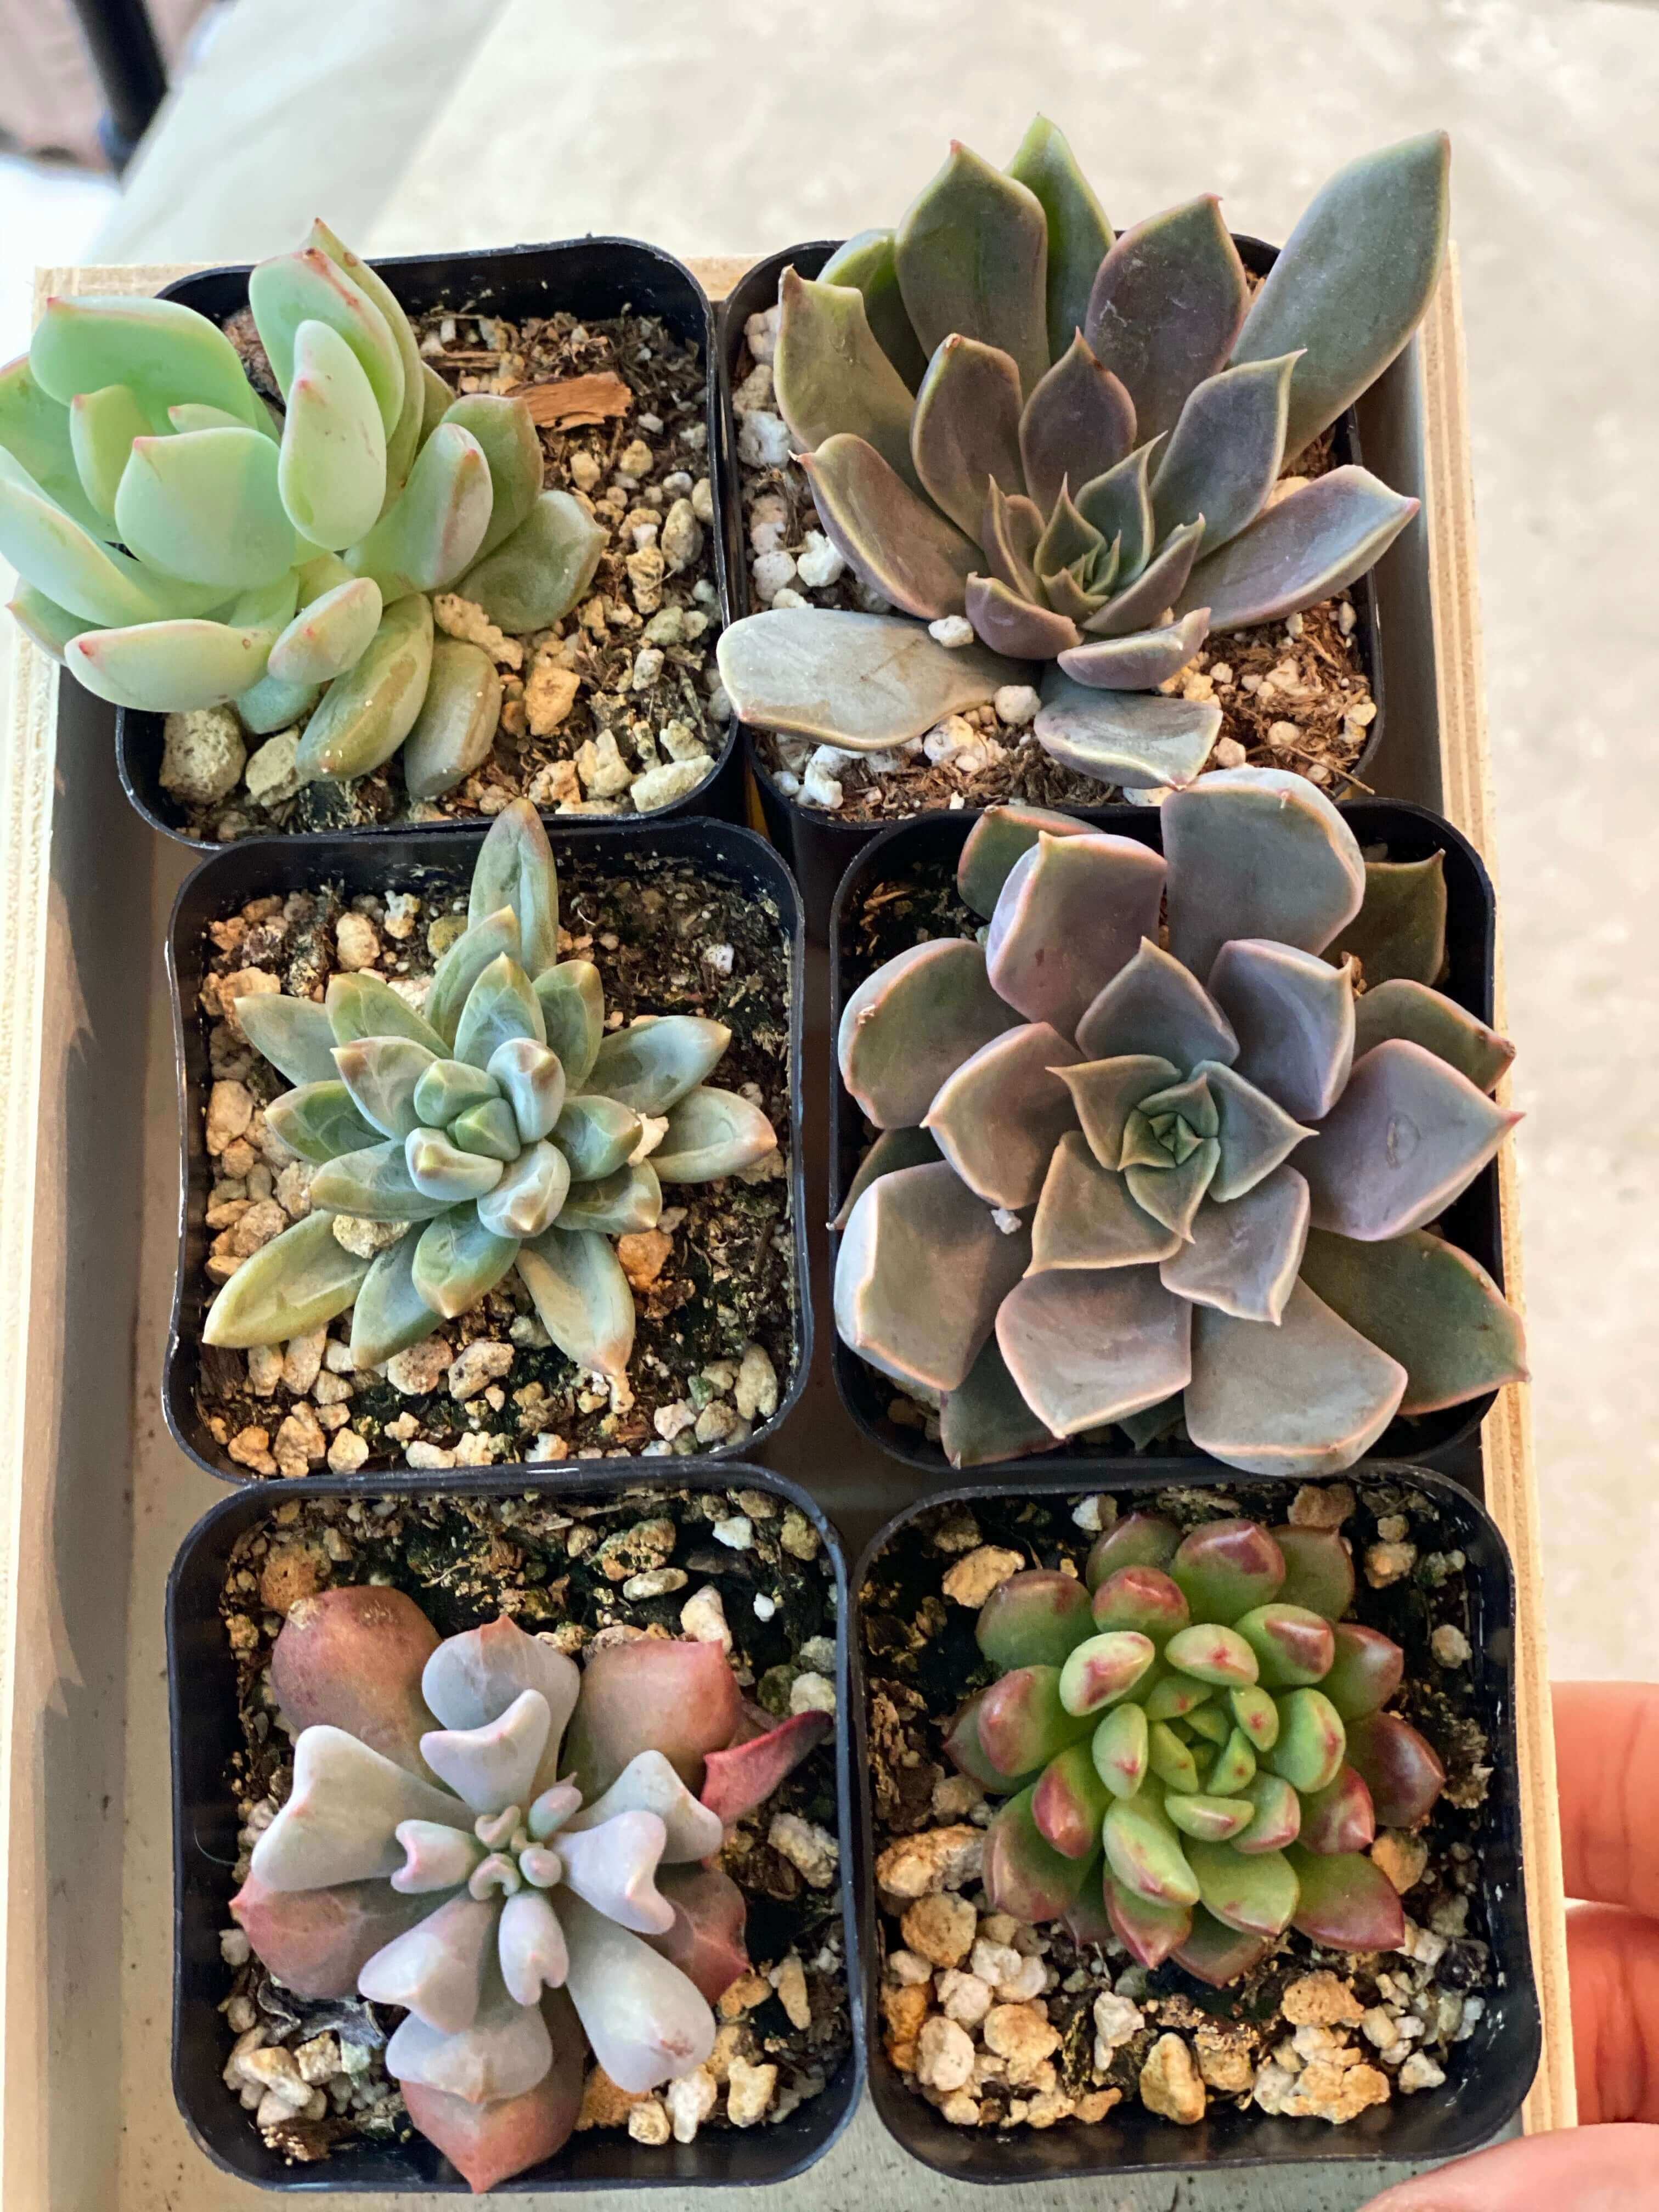 Varied selection of 2-inch succulents in a pack, each with unique leaf formations and subtle color differences.